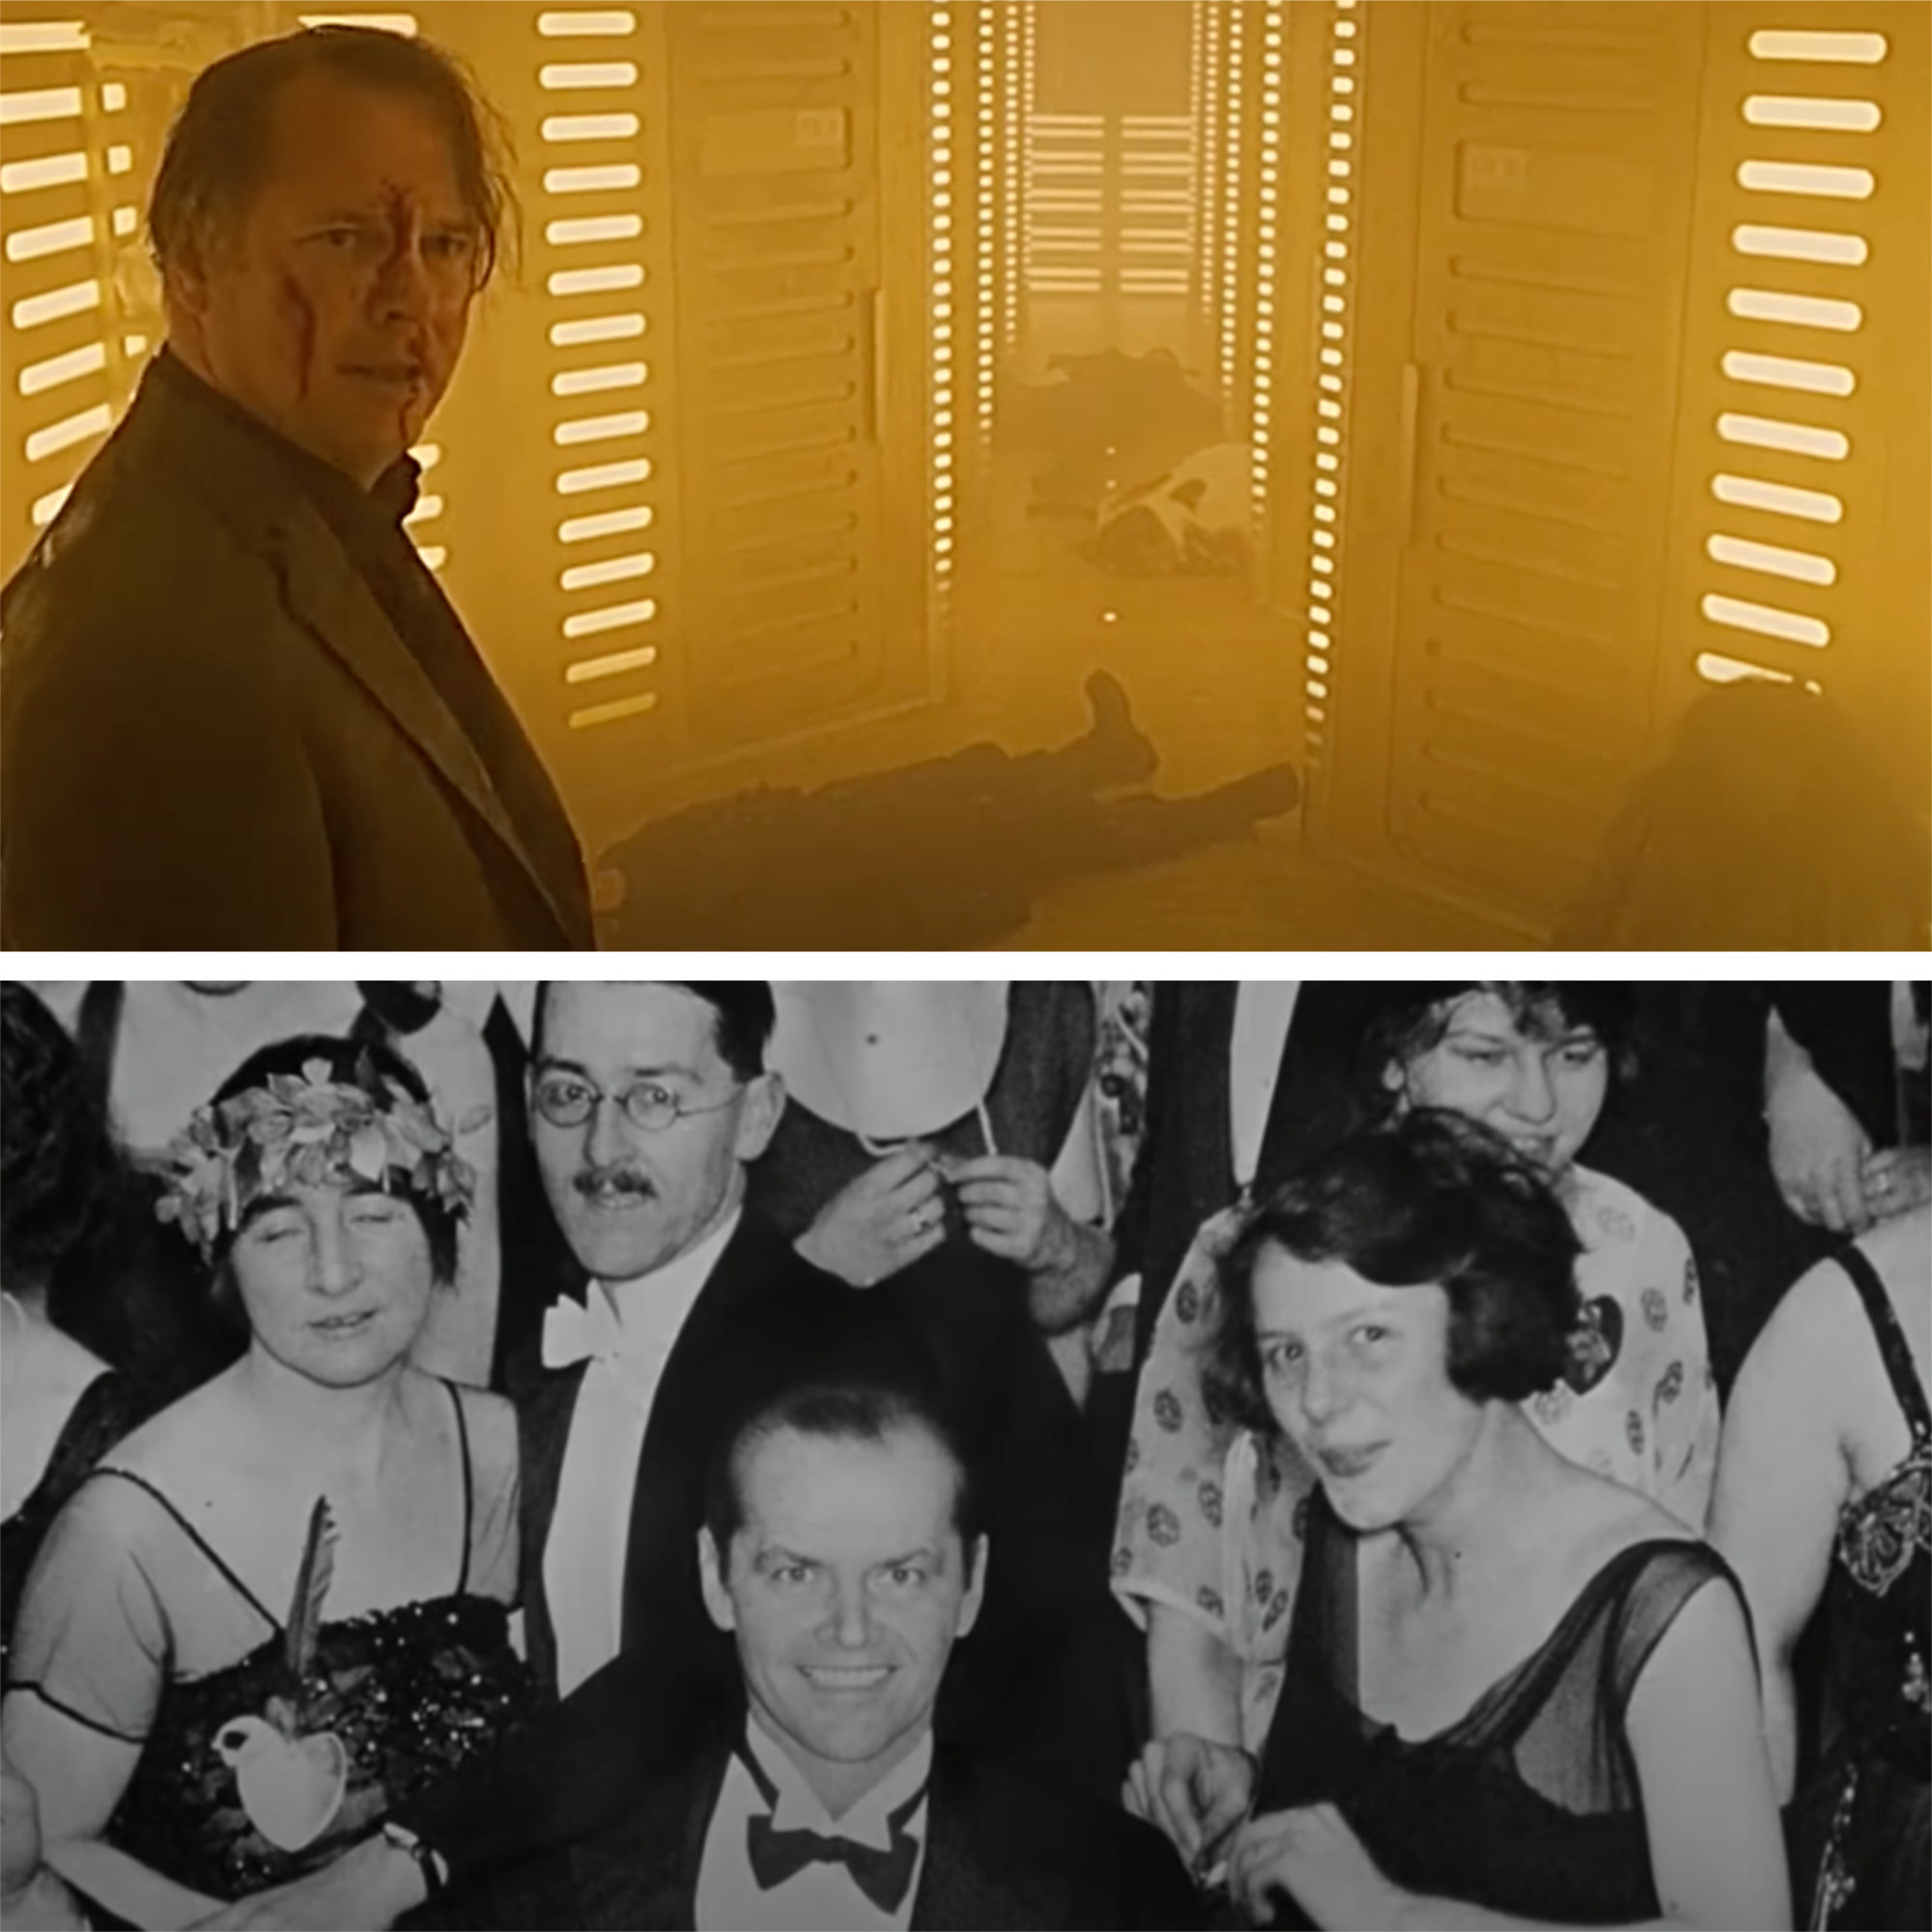 Sauna scene from Snowpiercer and the picture reveal in The Shining